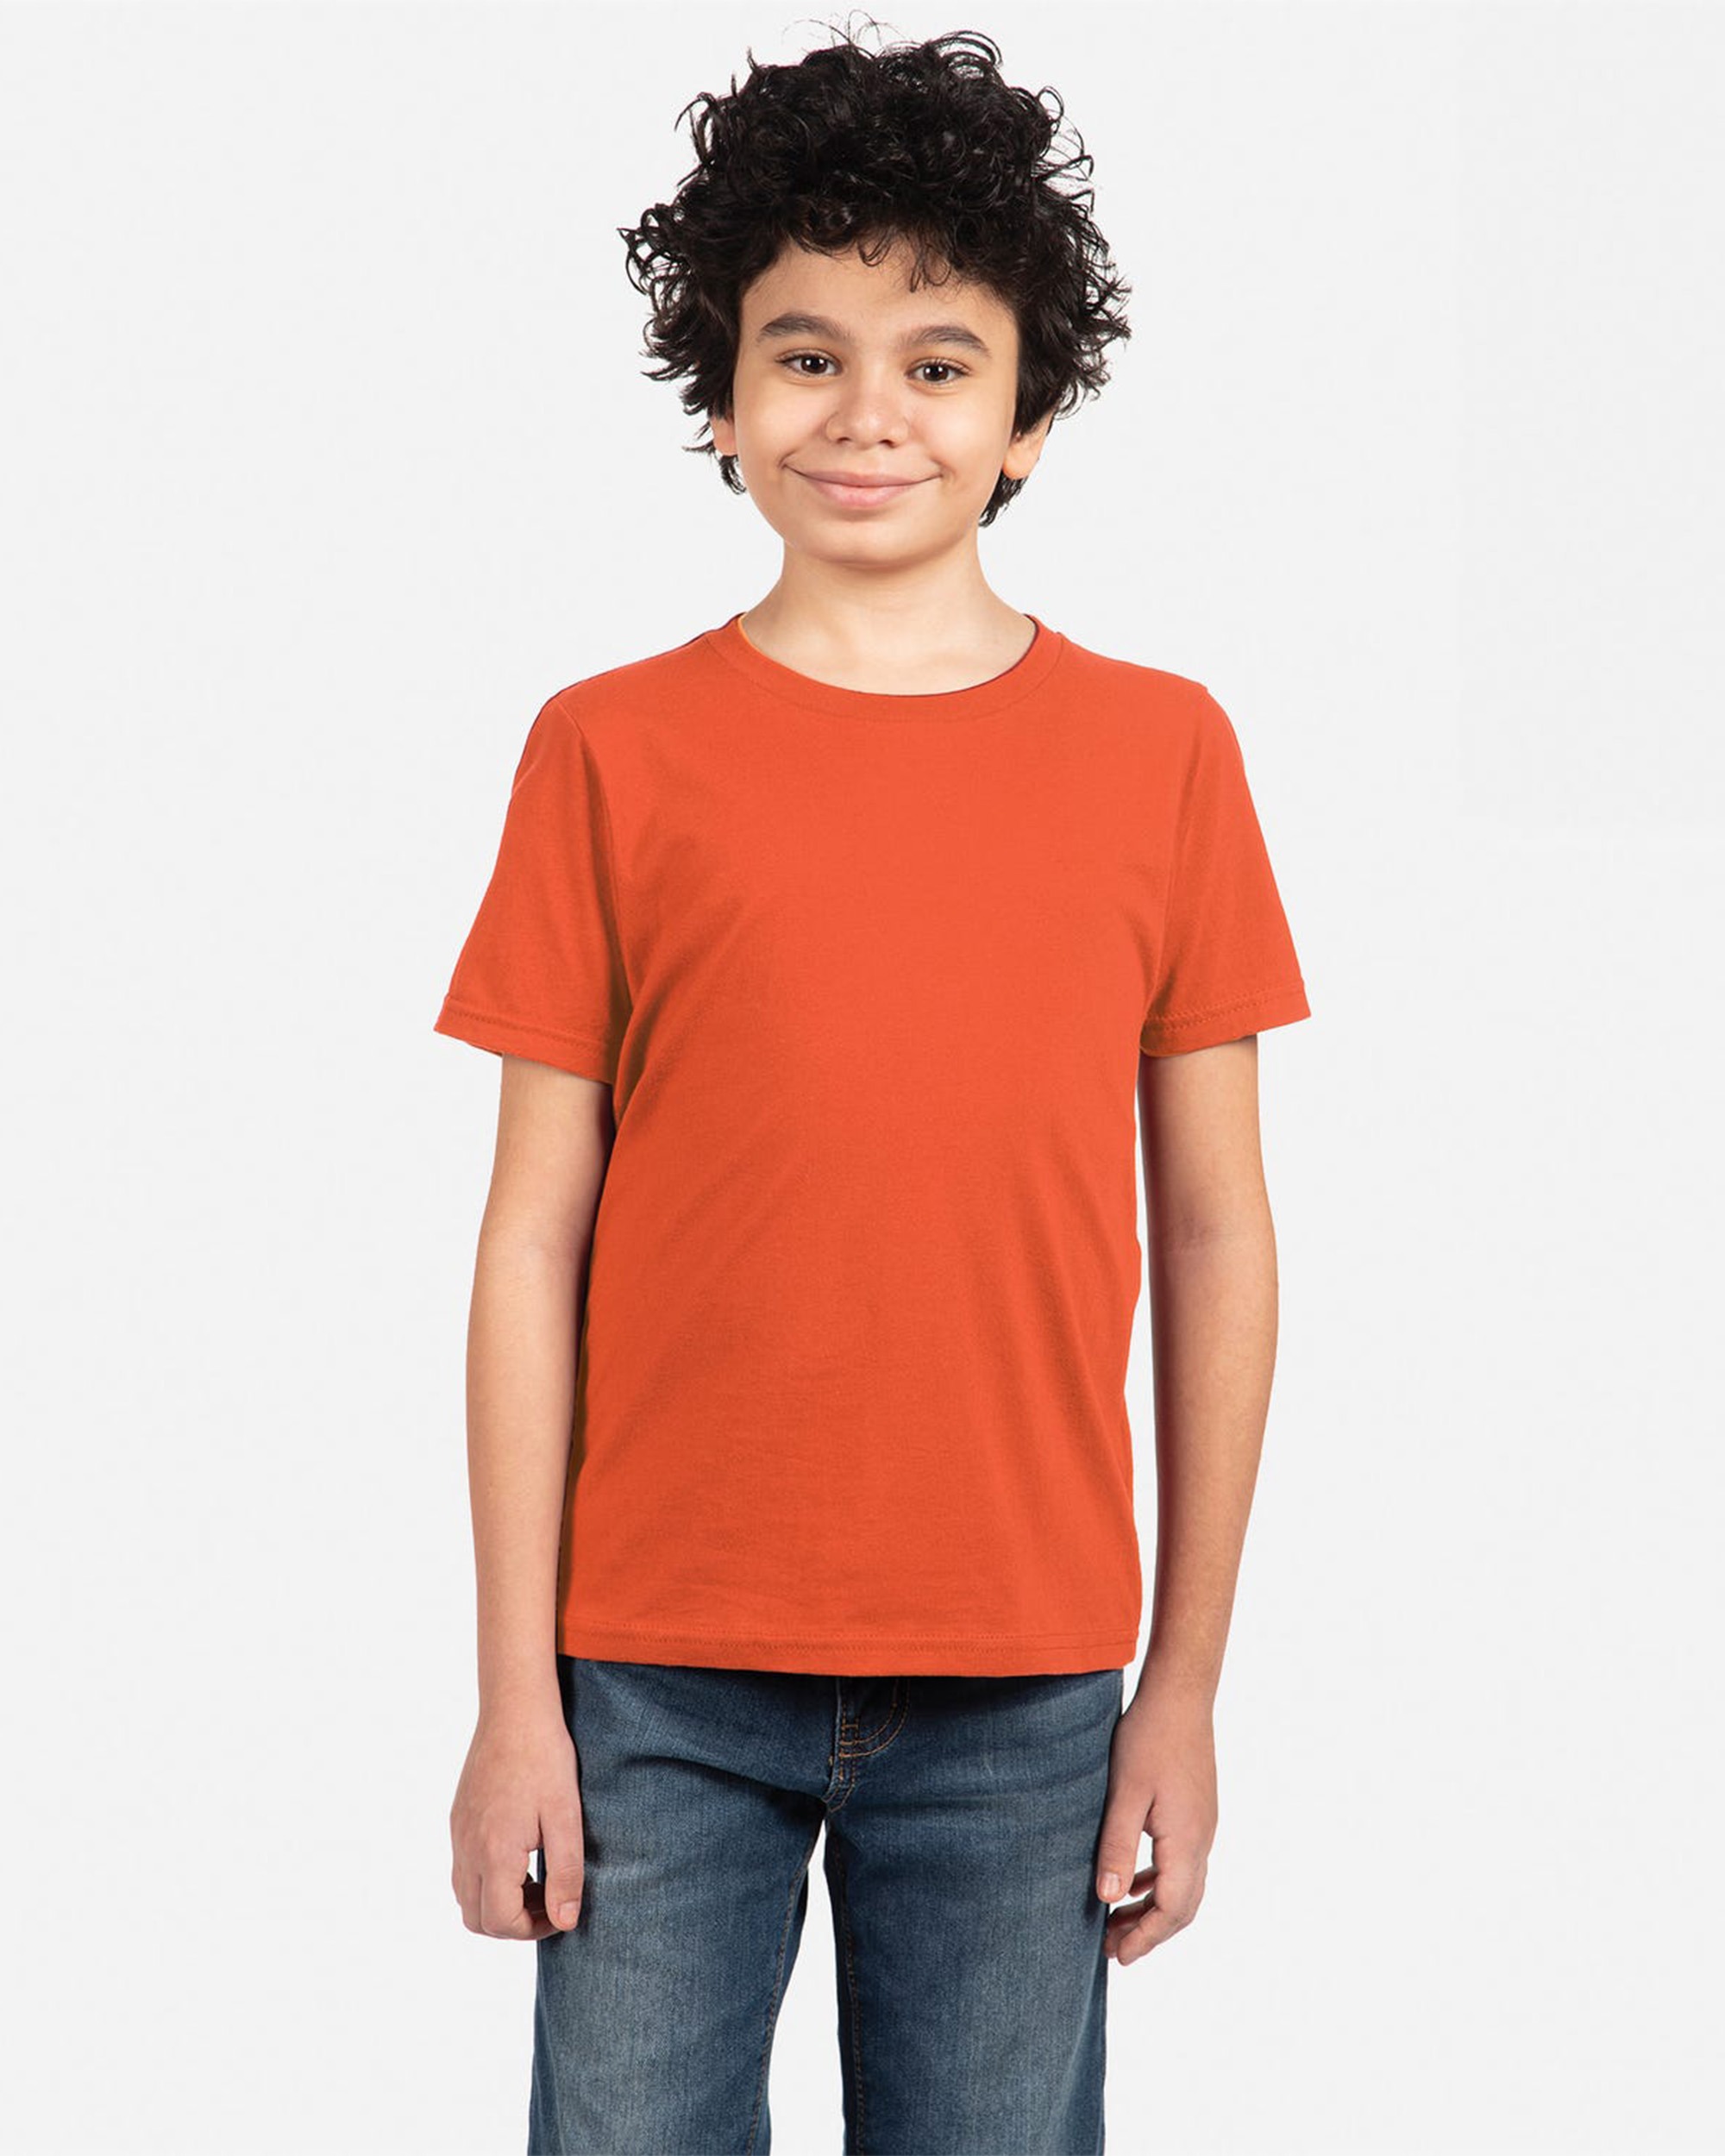 Next Level Apparel® 3310 Youth Cotton T-Shirt